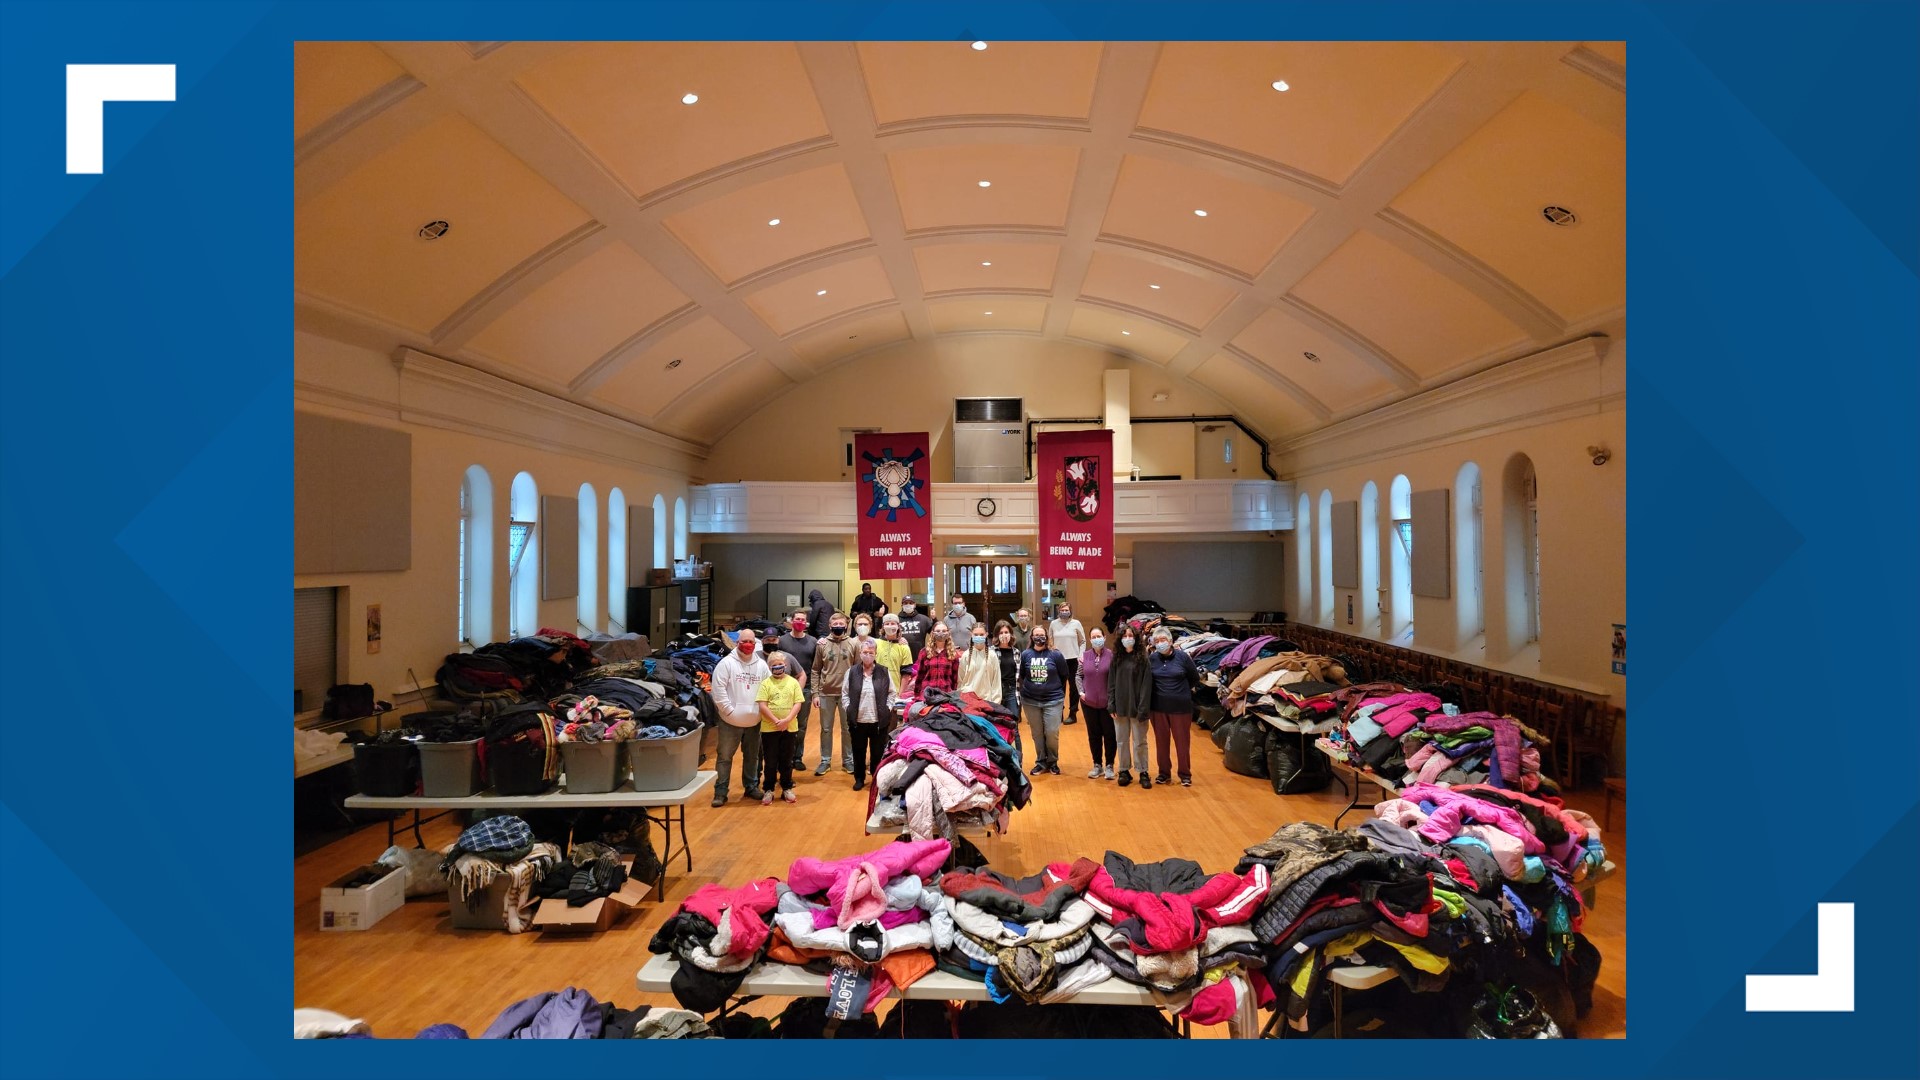 Coats of Friendship is a local nonprofit that collects coats of all sizes for men, women, and children.